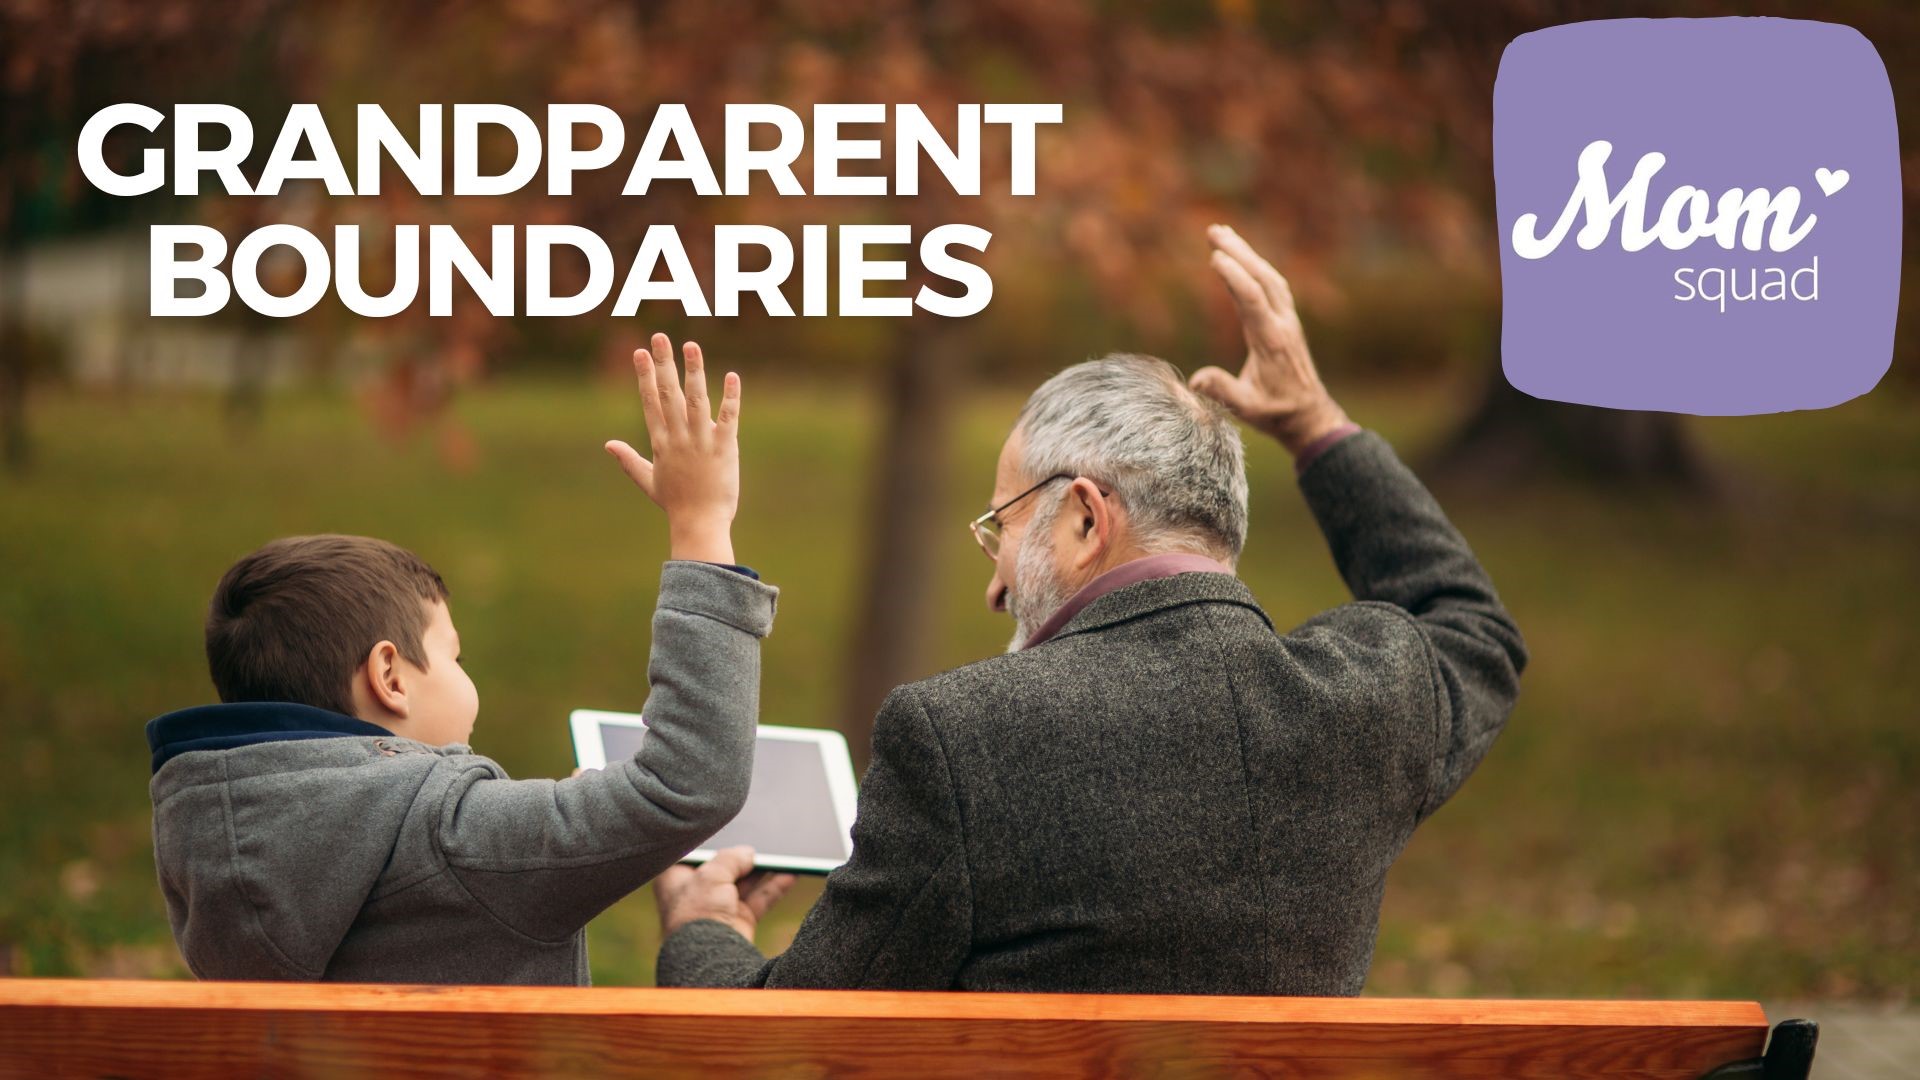 Maureen Kyle talks with a relationship expert on how to best set boundaries for grandparents and parents when raising kids.